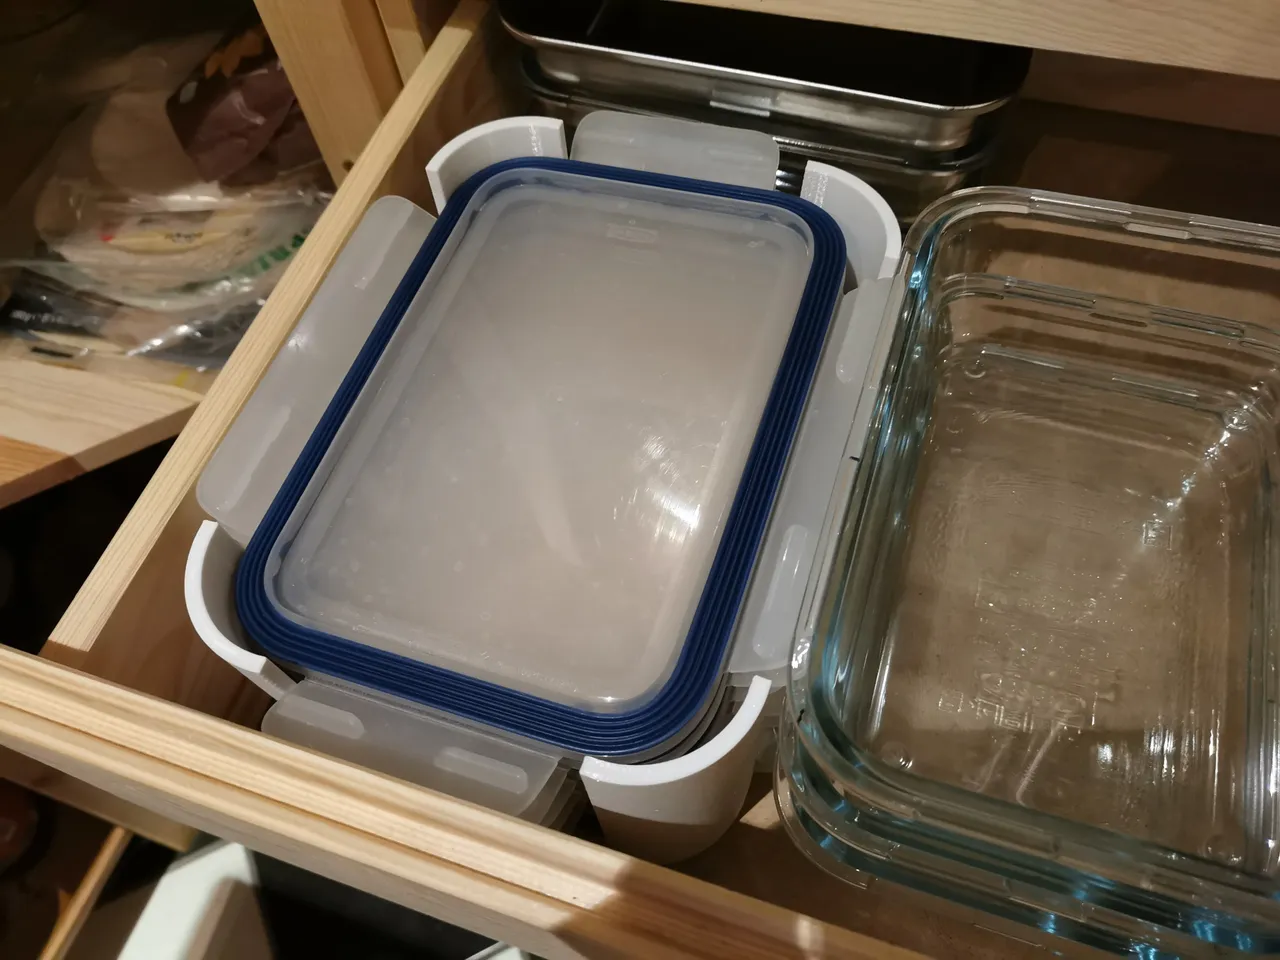 IKEA 365+ Food container with lid, round/plastic, 15 oz - IKEA